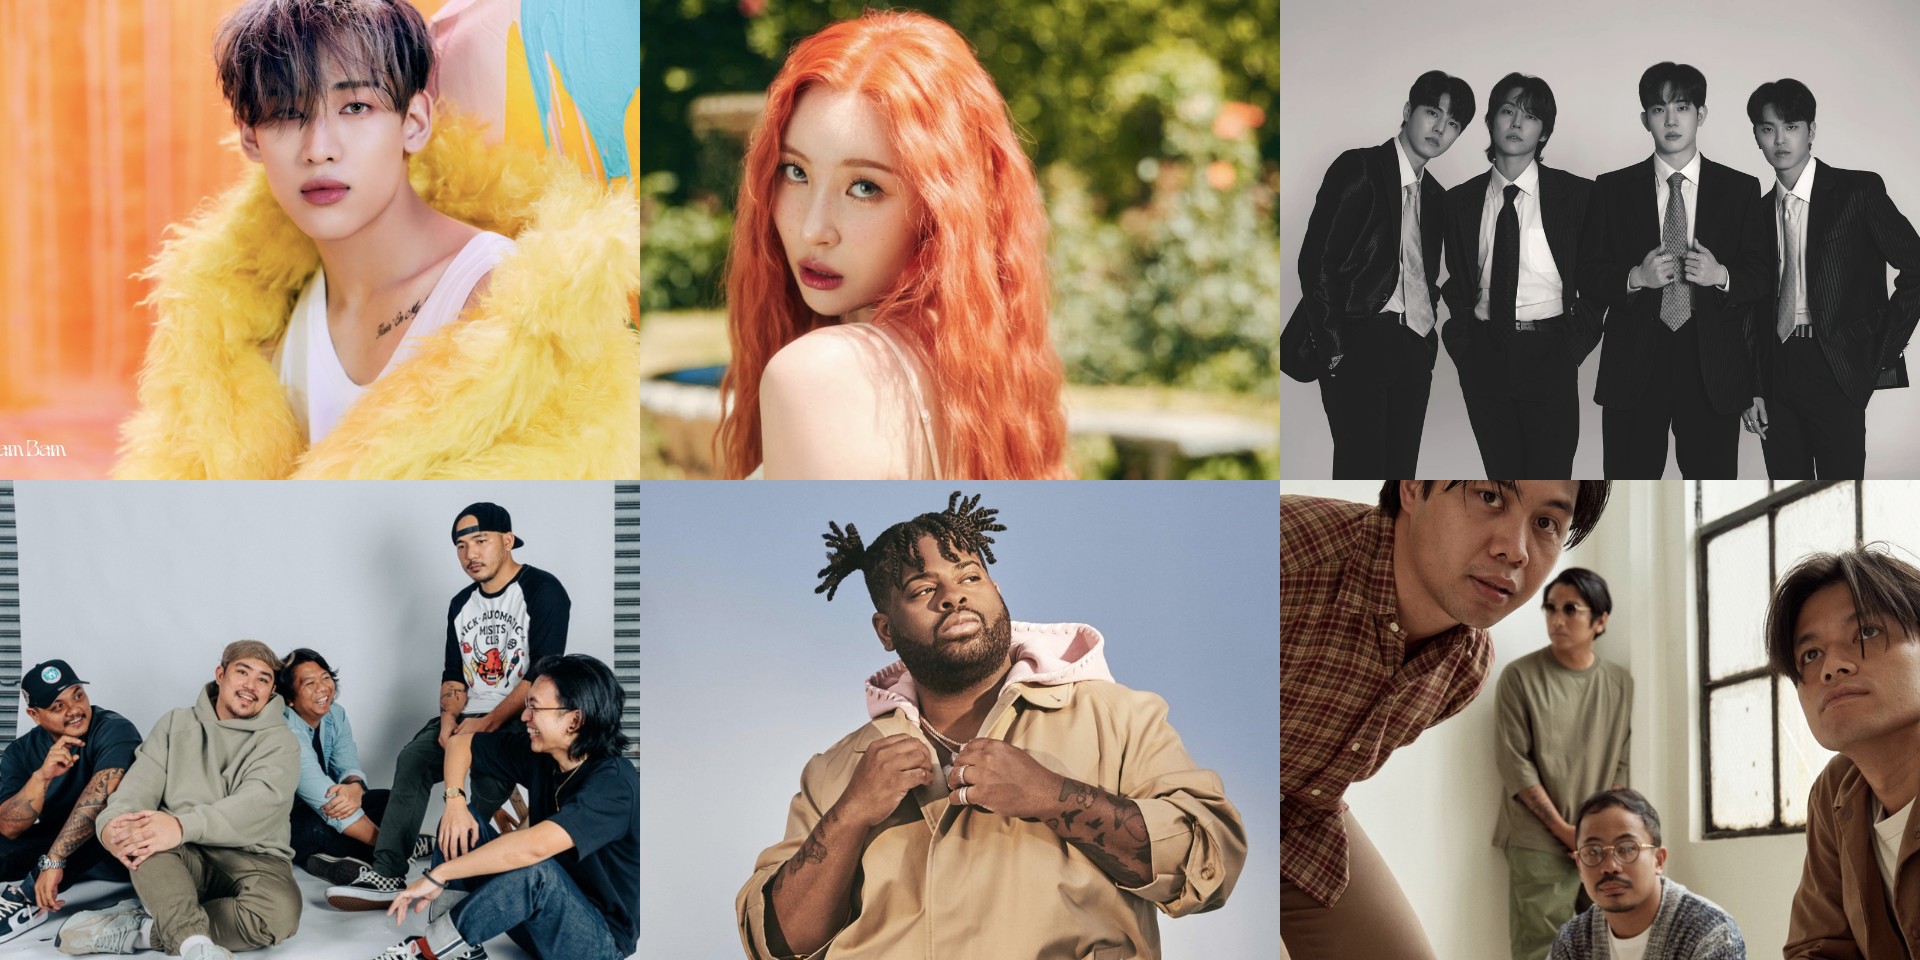 Careless Music announces Wavy Baby Music Festival lineup – BamBam, SUNMI, PINK SWEAT$, The Rose, SOS, December Avenue, and more